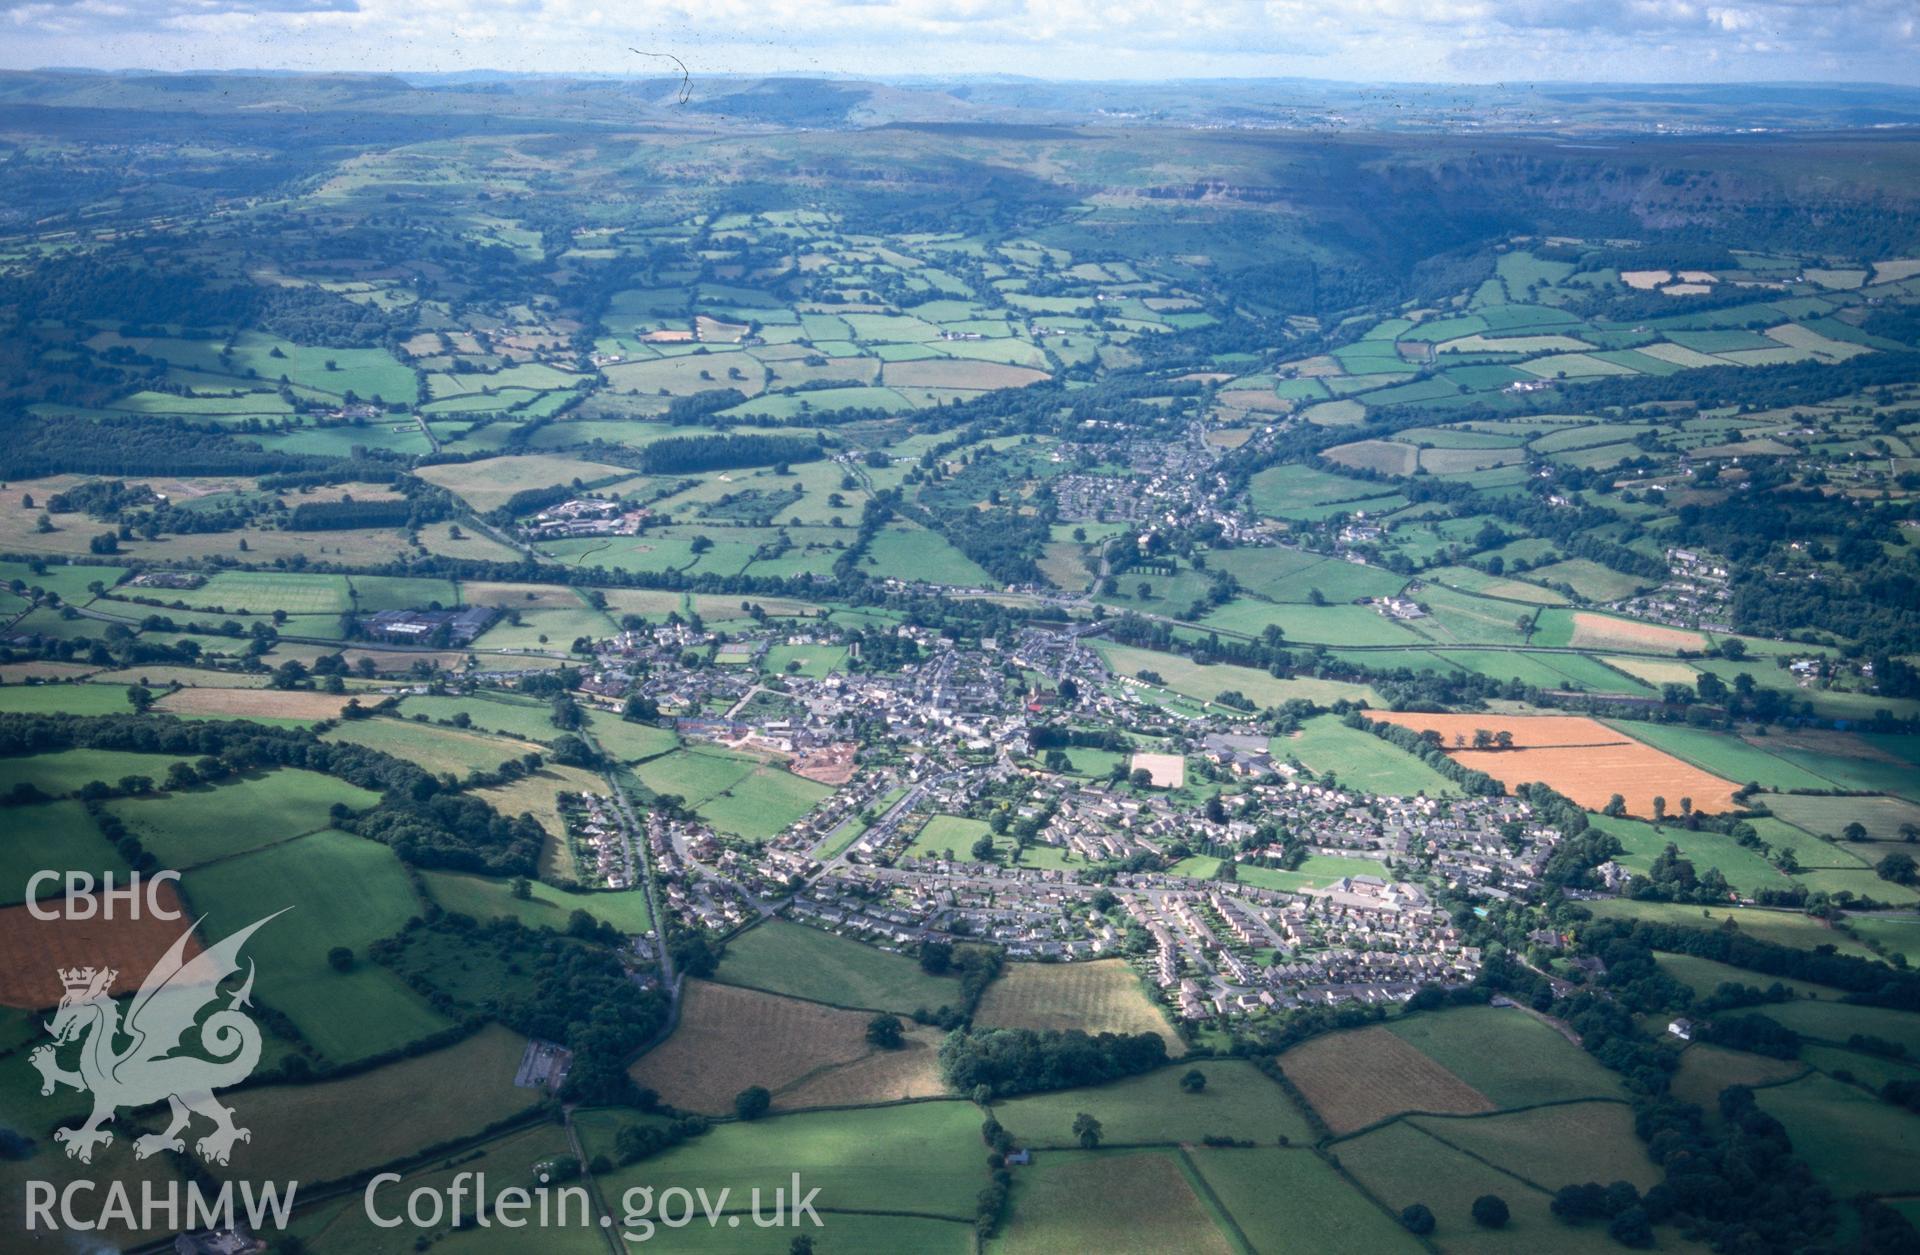 Slide of RCAHMW colour oblique aerial photograph of Crickhowell;crughywel  (medieval Town), taken by T.G. Driver, 24/7/1999.